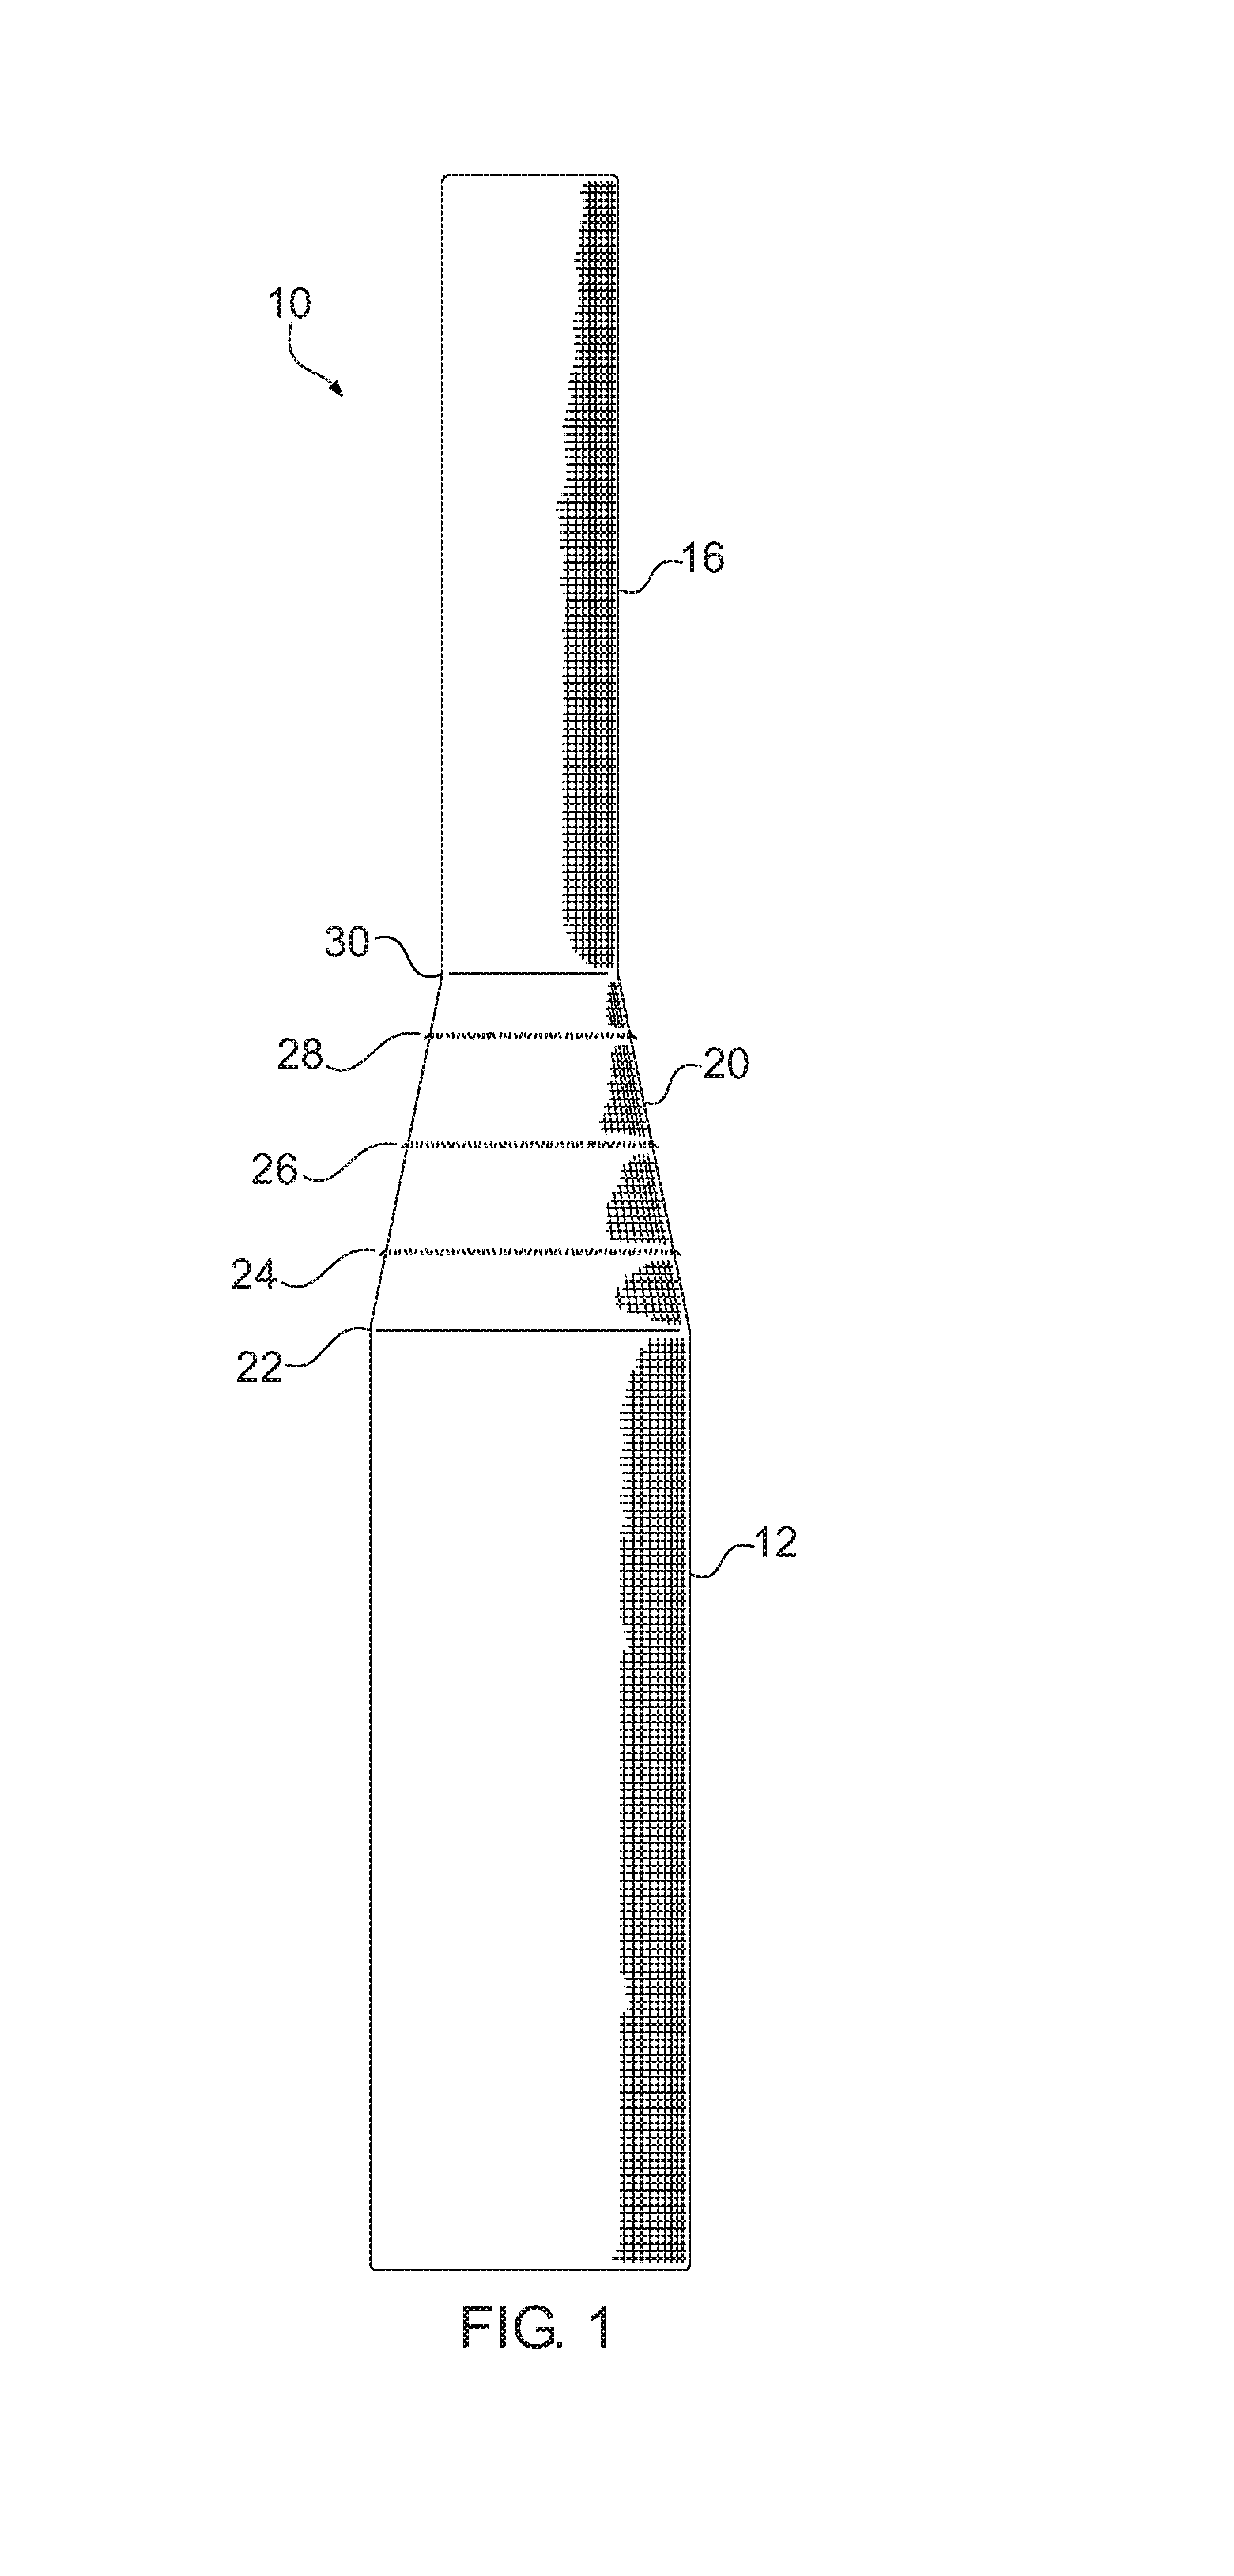 Tapered tubular implant formed from woven fabric